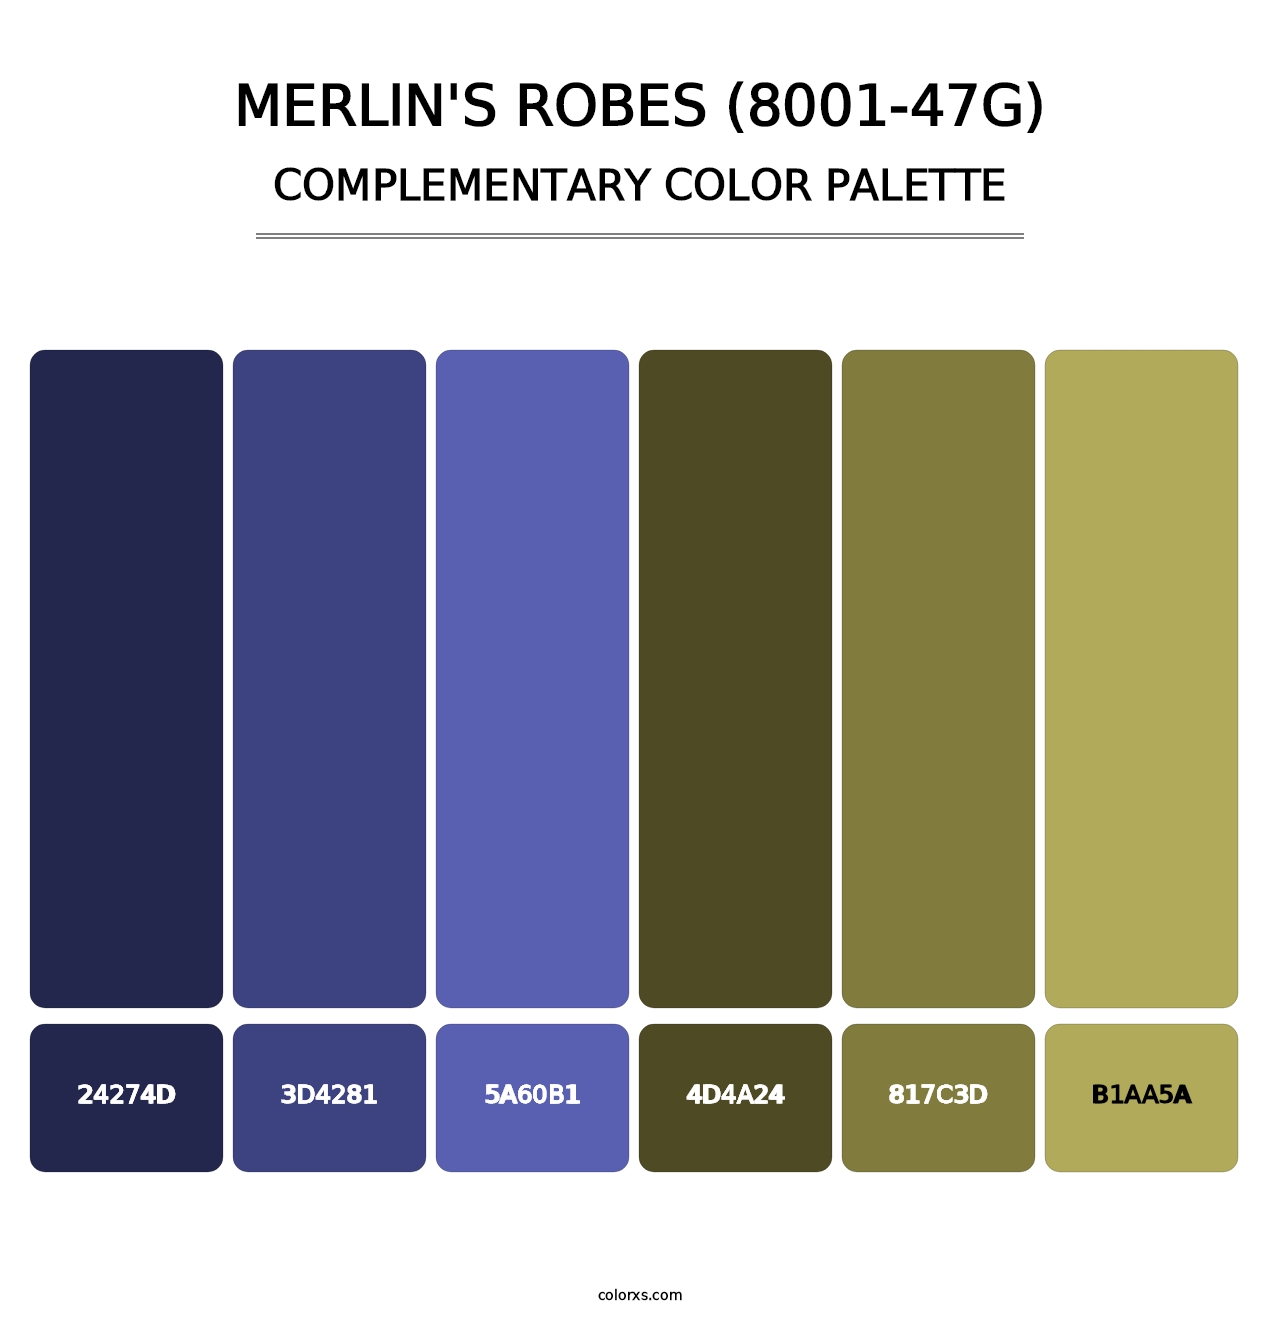 Merlin's Robes (8001-47G) - Complementary Color Palette